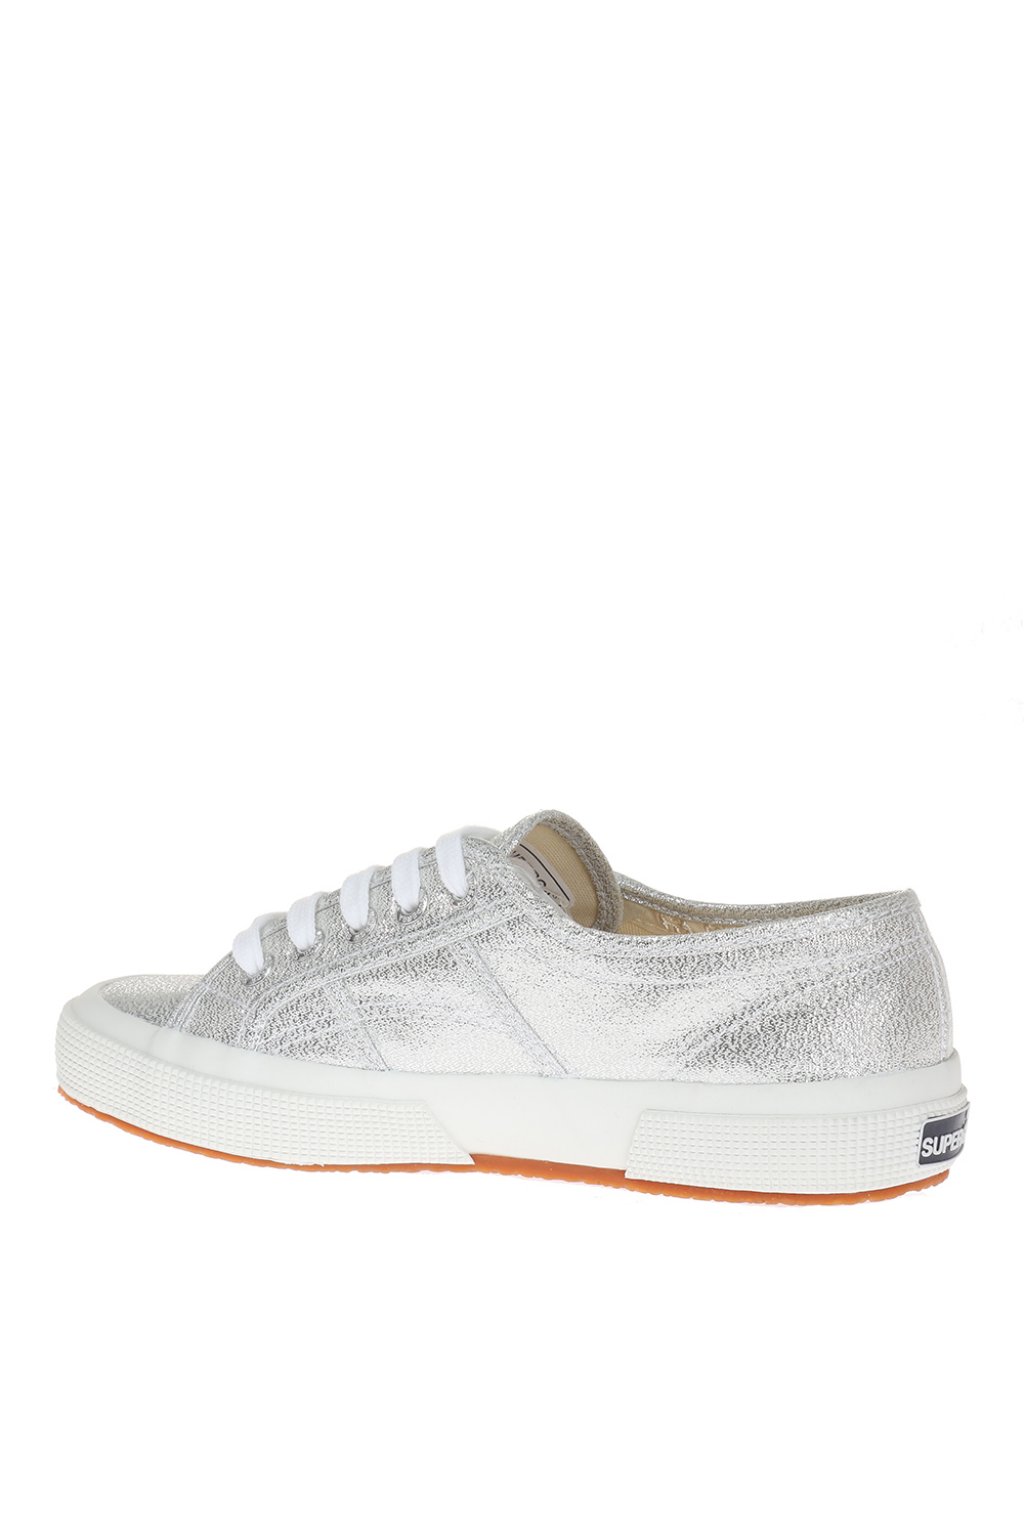 Superga 'Lamew' lace-up sneakers